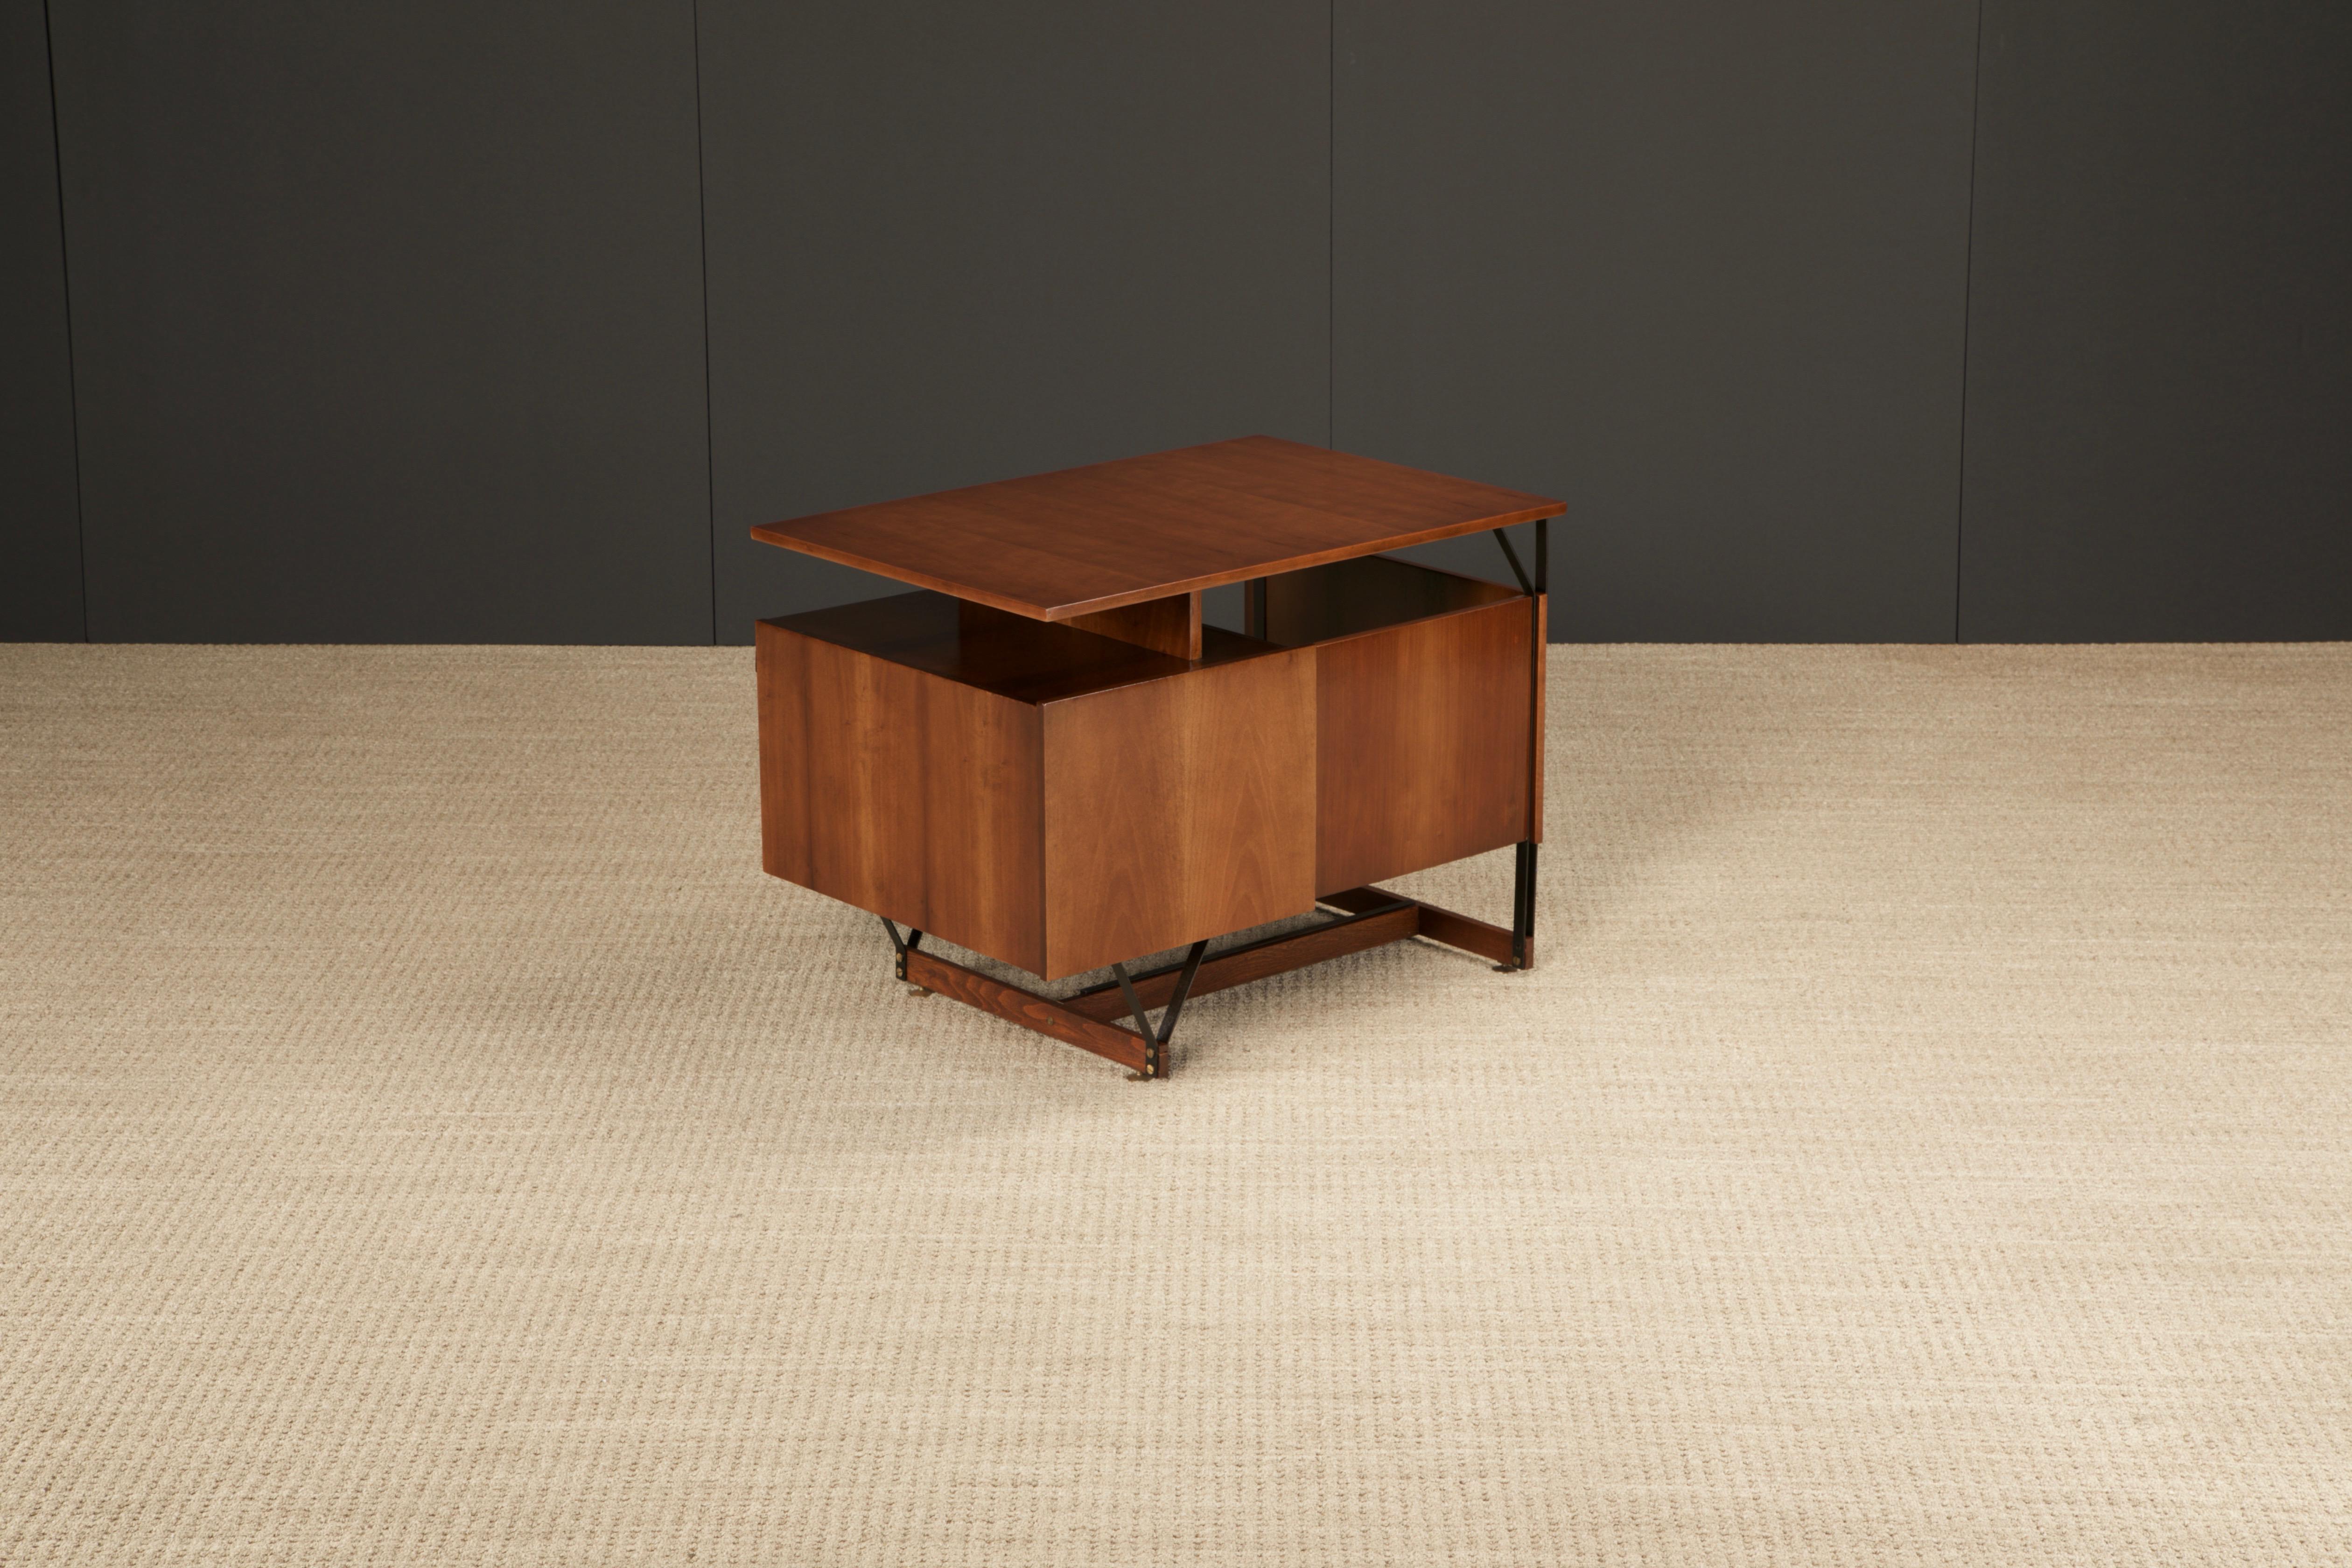 Italian Mid-Century Modern Desk, Style of Gio Ponti, c 1950s, Refinished For Sale 12